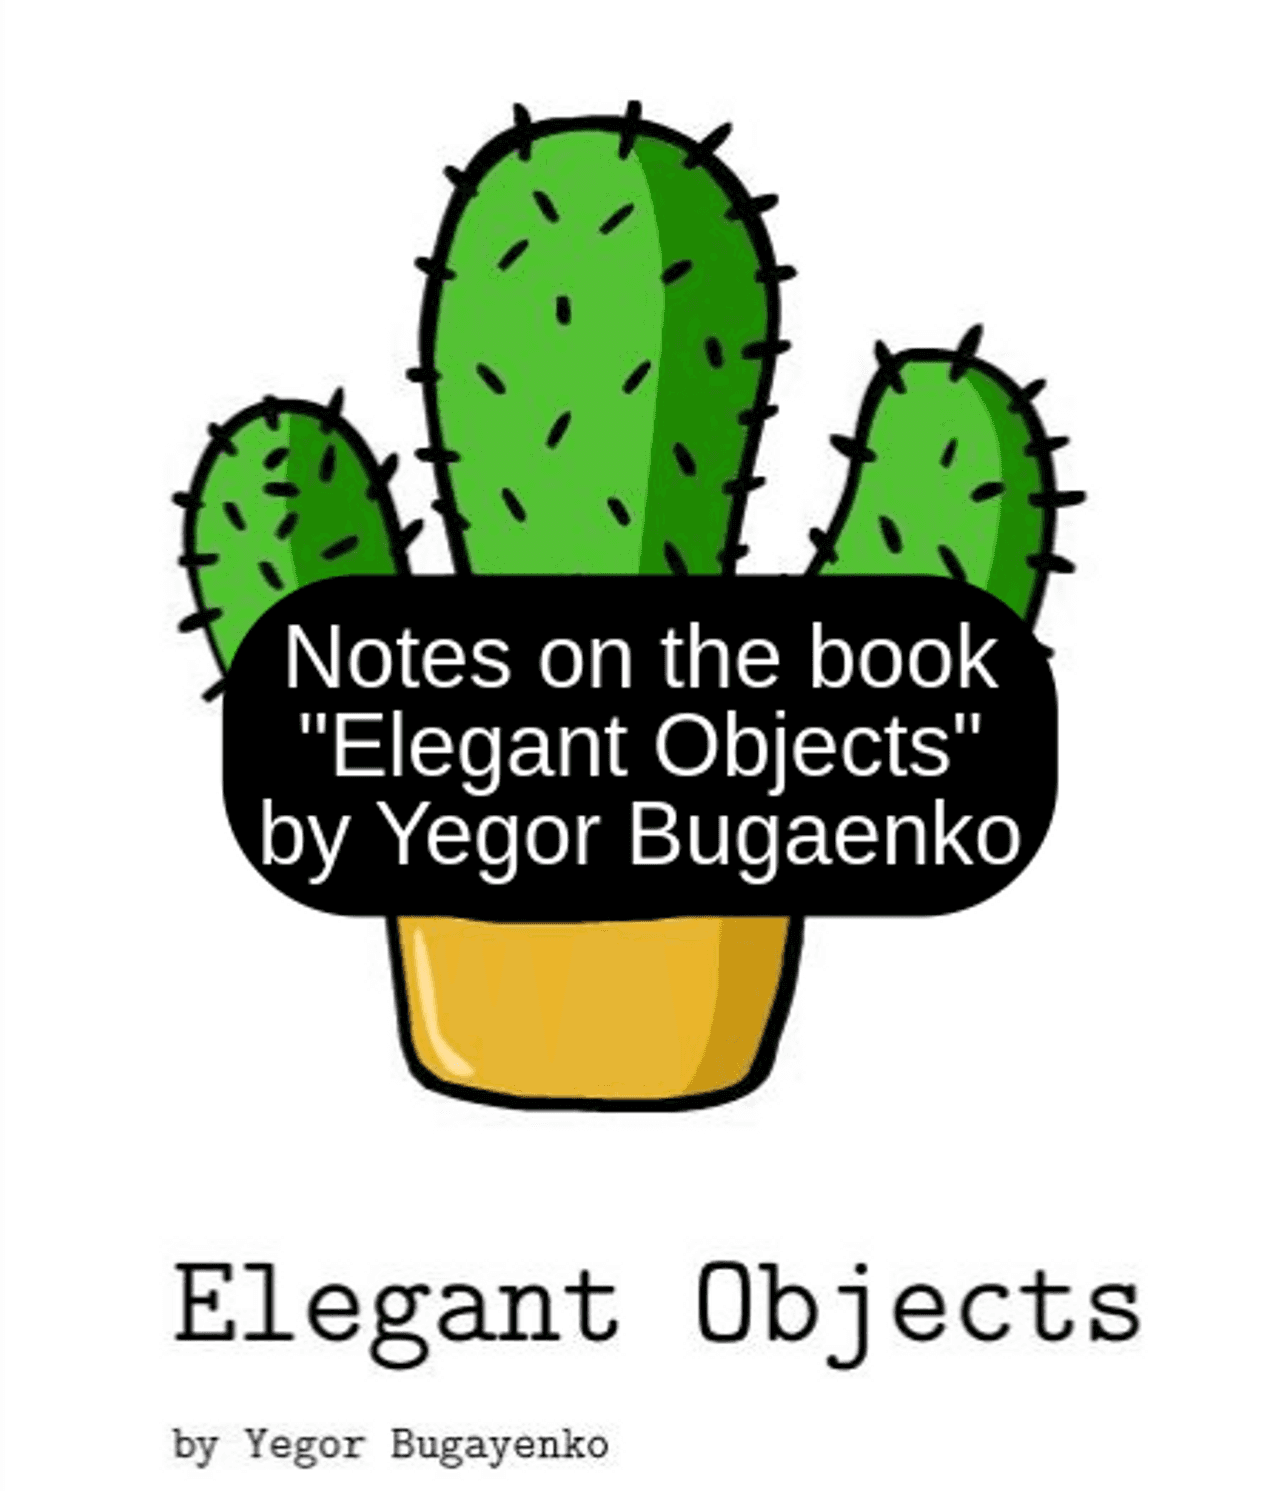 Notes on the book Elegant Objects by Yegor Bugaenko